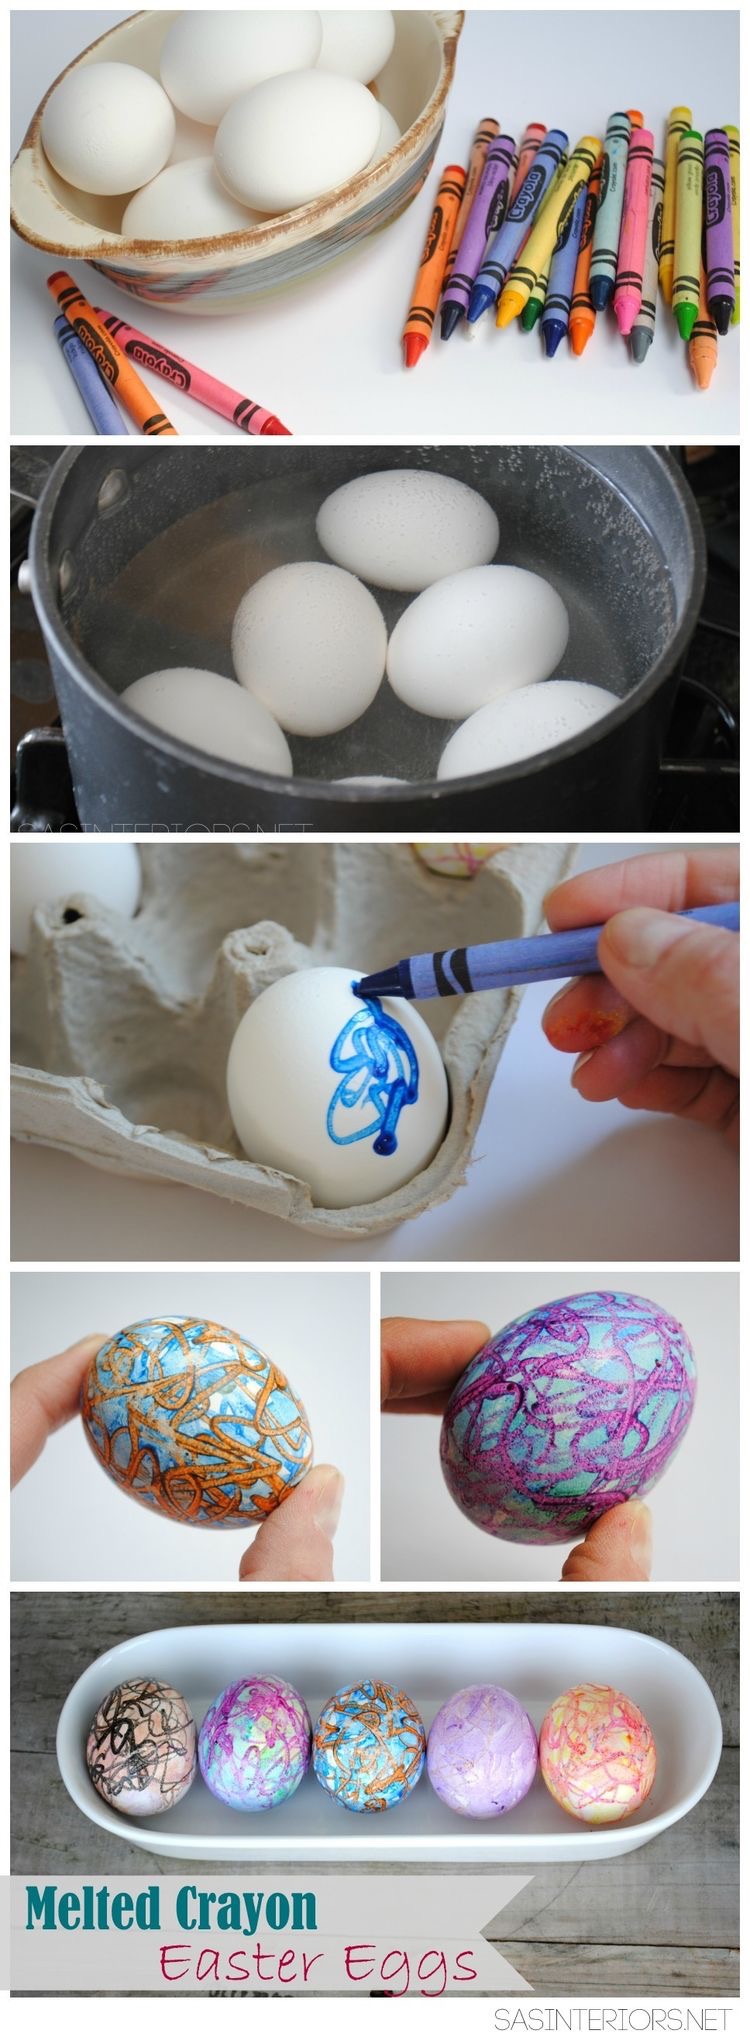 12 creative ways to decorate Easter eggs....